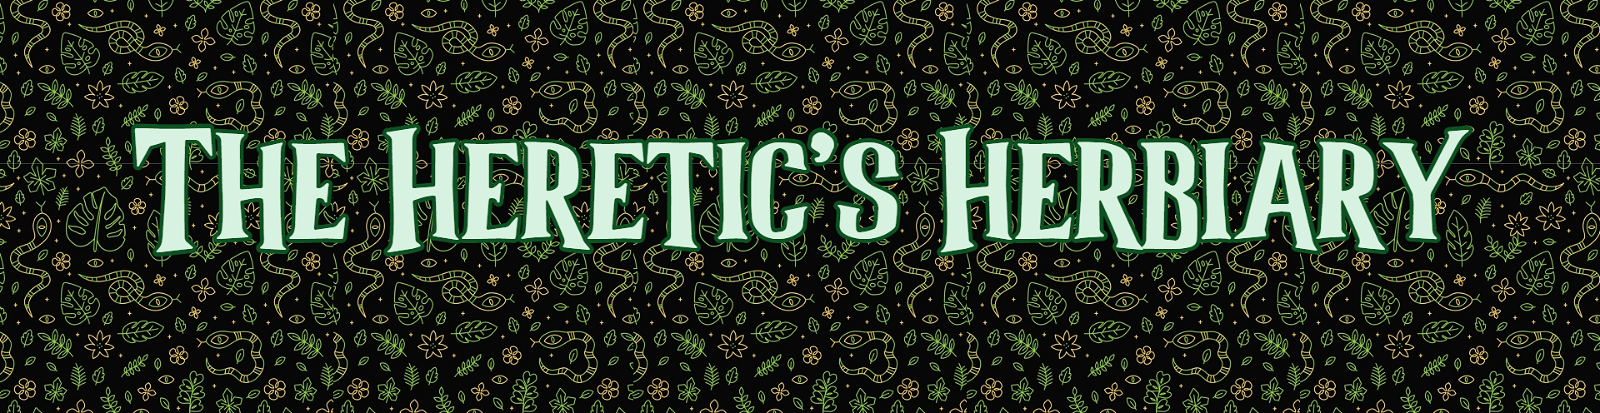 The Heretic's Herbiary vol #07